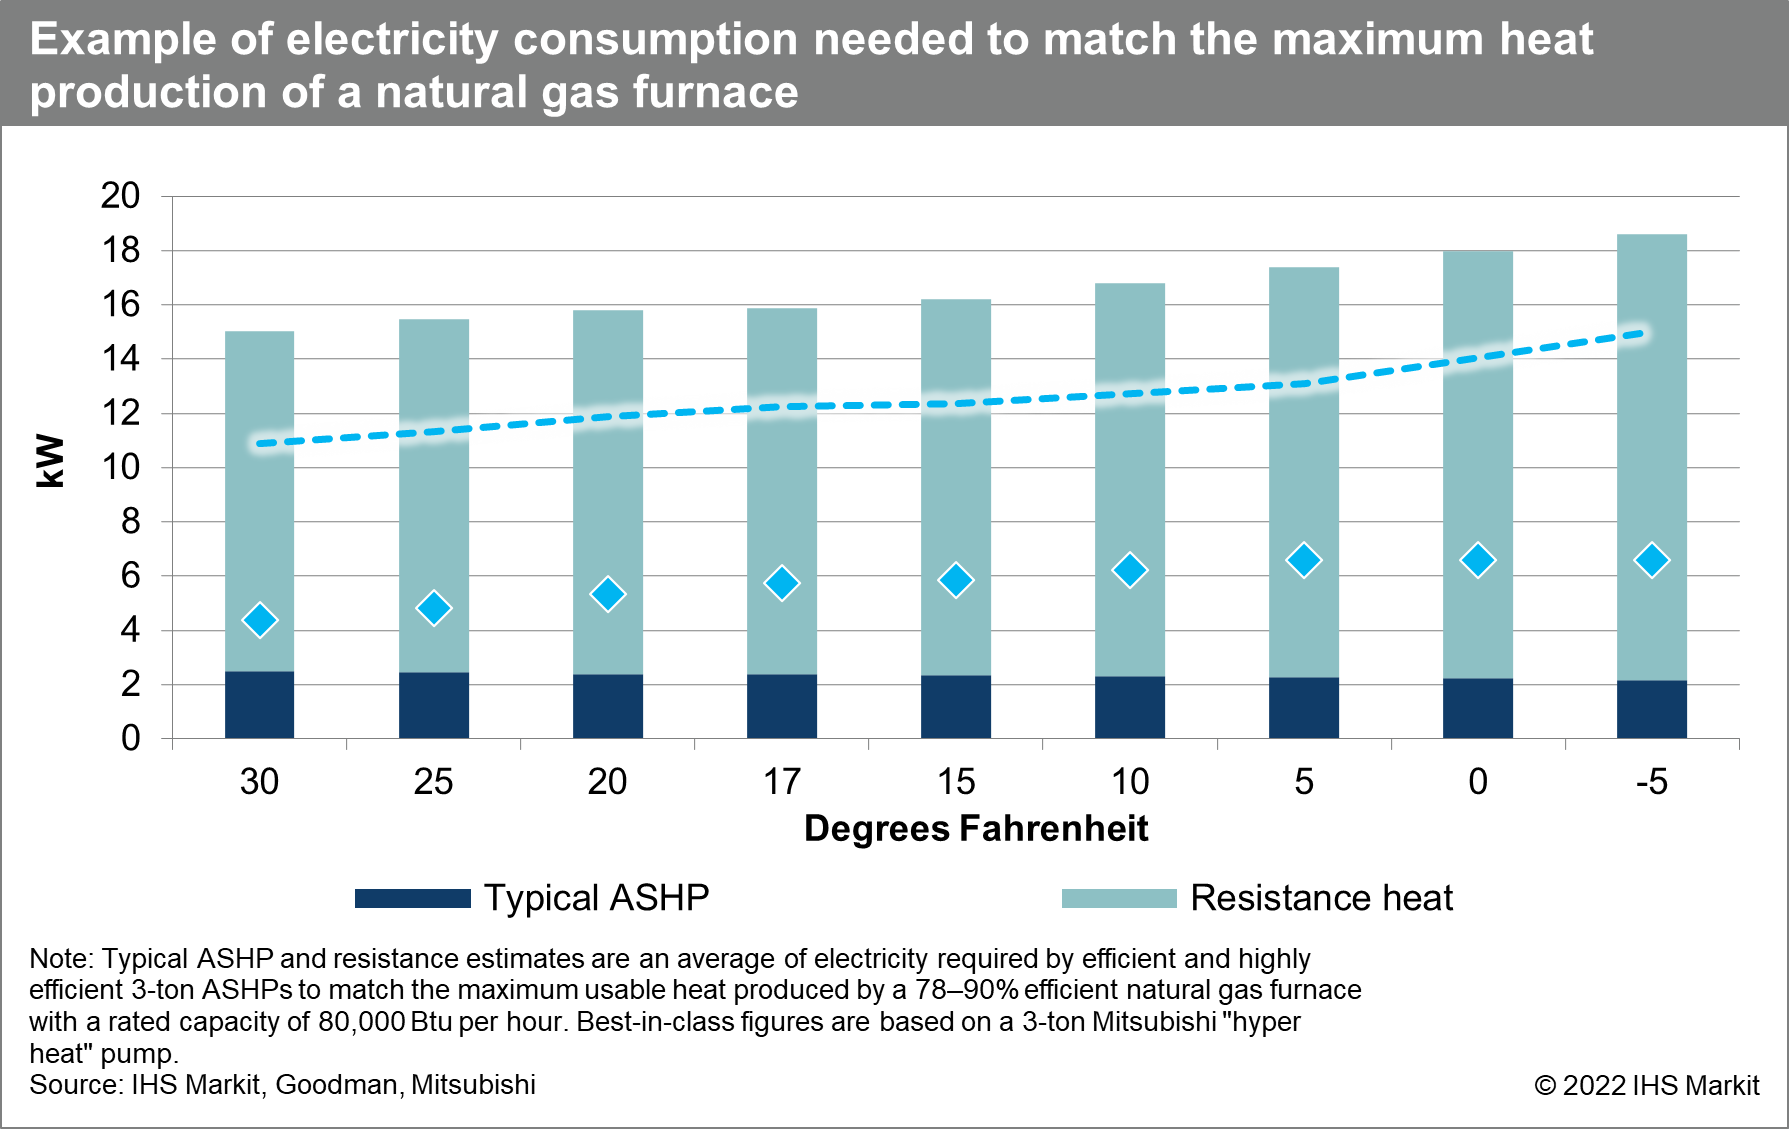 Example of electricity consumption needed to match the maximum heat production of a natural gas furnace